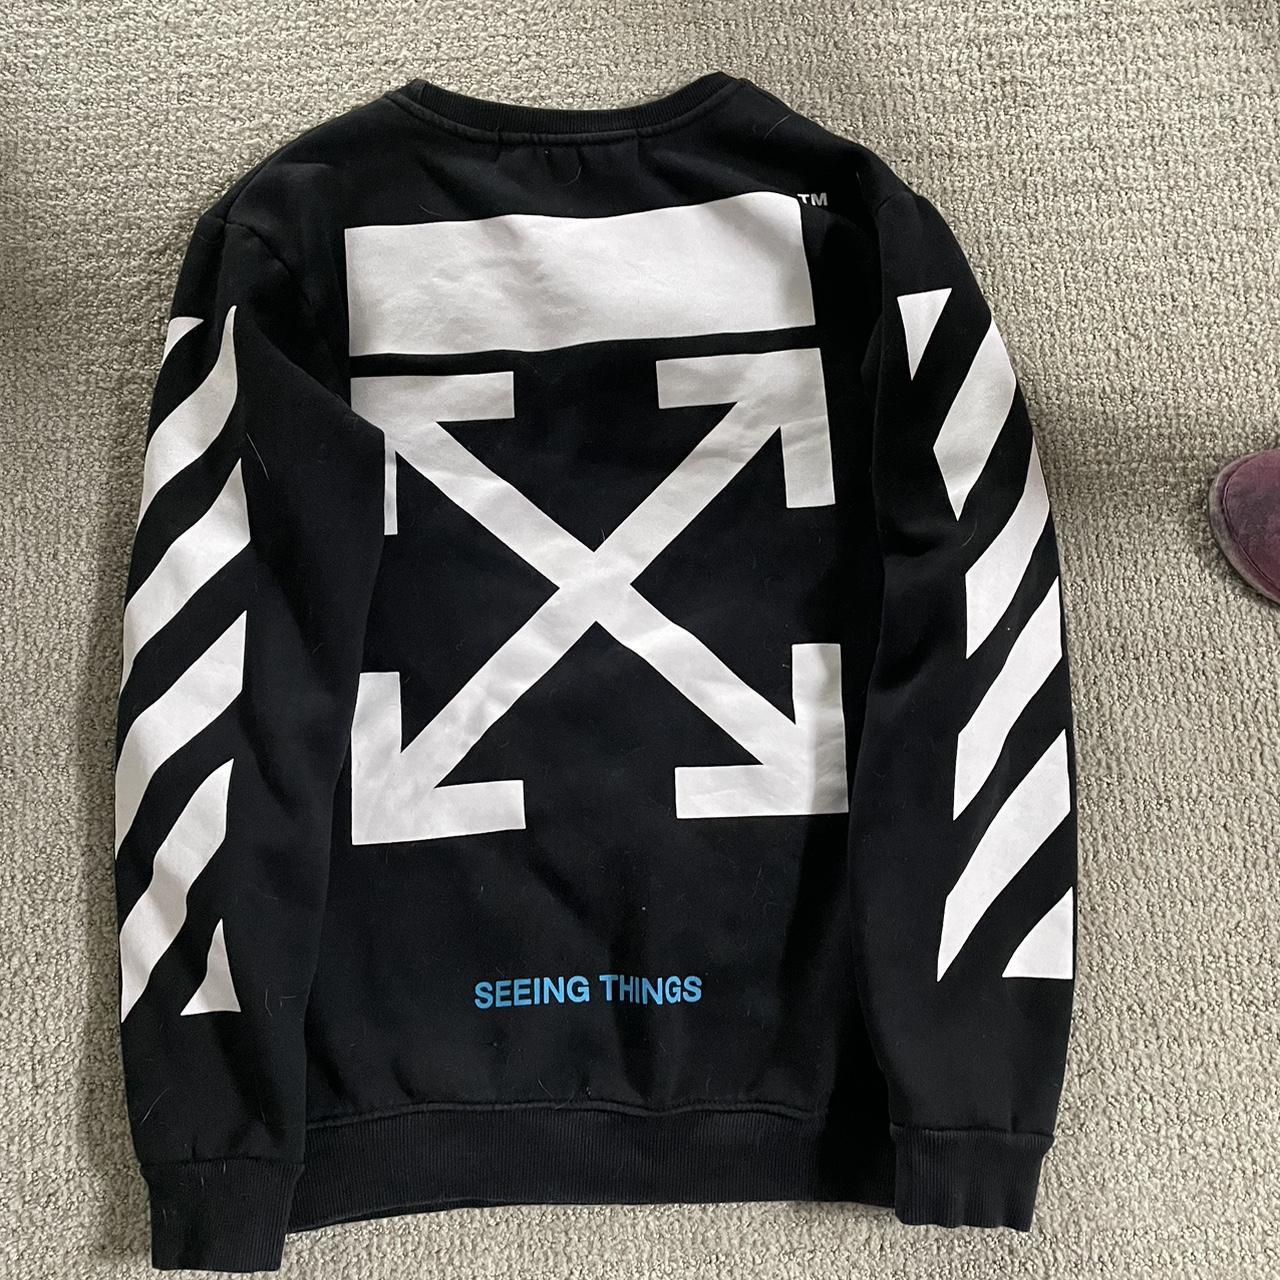 OFF-WHITE: sweater for boys - Black